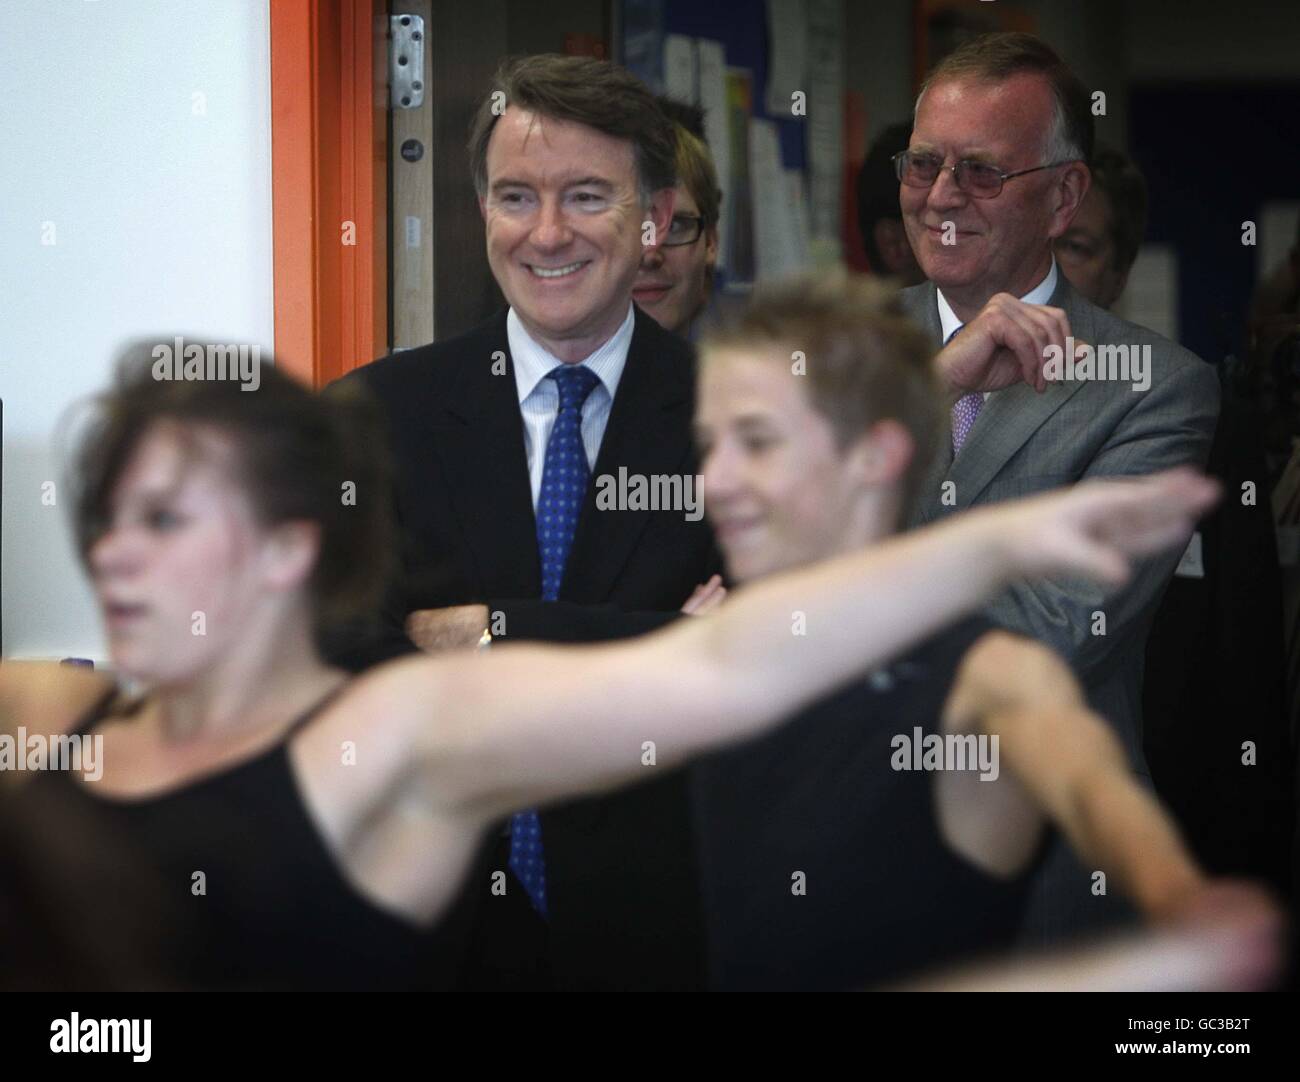 Business Secretary Lord Mandelson watches dancers during a visit to the the British School of Performing Arts in Croydon. PRESS ASSOCIATION Photo. Picture date: Thursday September 24 2009. Mandelson visited the school with Culture secretary Ben Bradshaw and former pupil Leona Lewis to support the next generation of creative talent. See PA story POLITICS Music. Photo credit should read: Richard Pohle/The Times/PA Wire Stock Photo